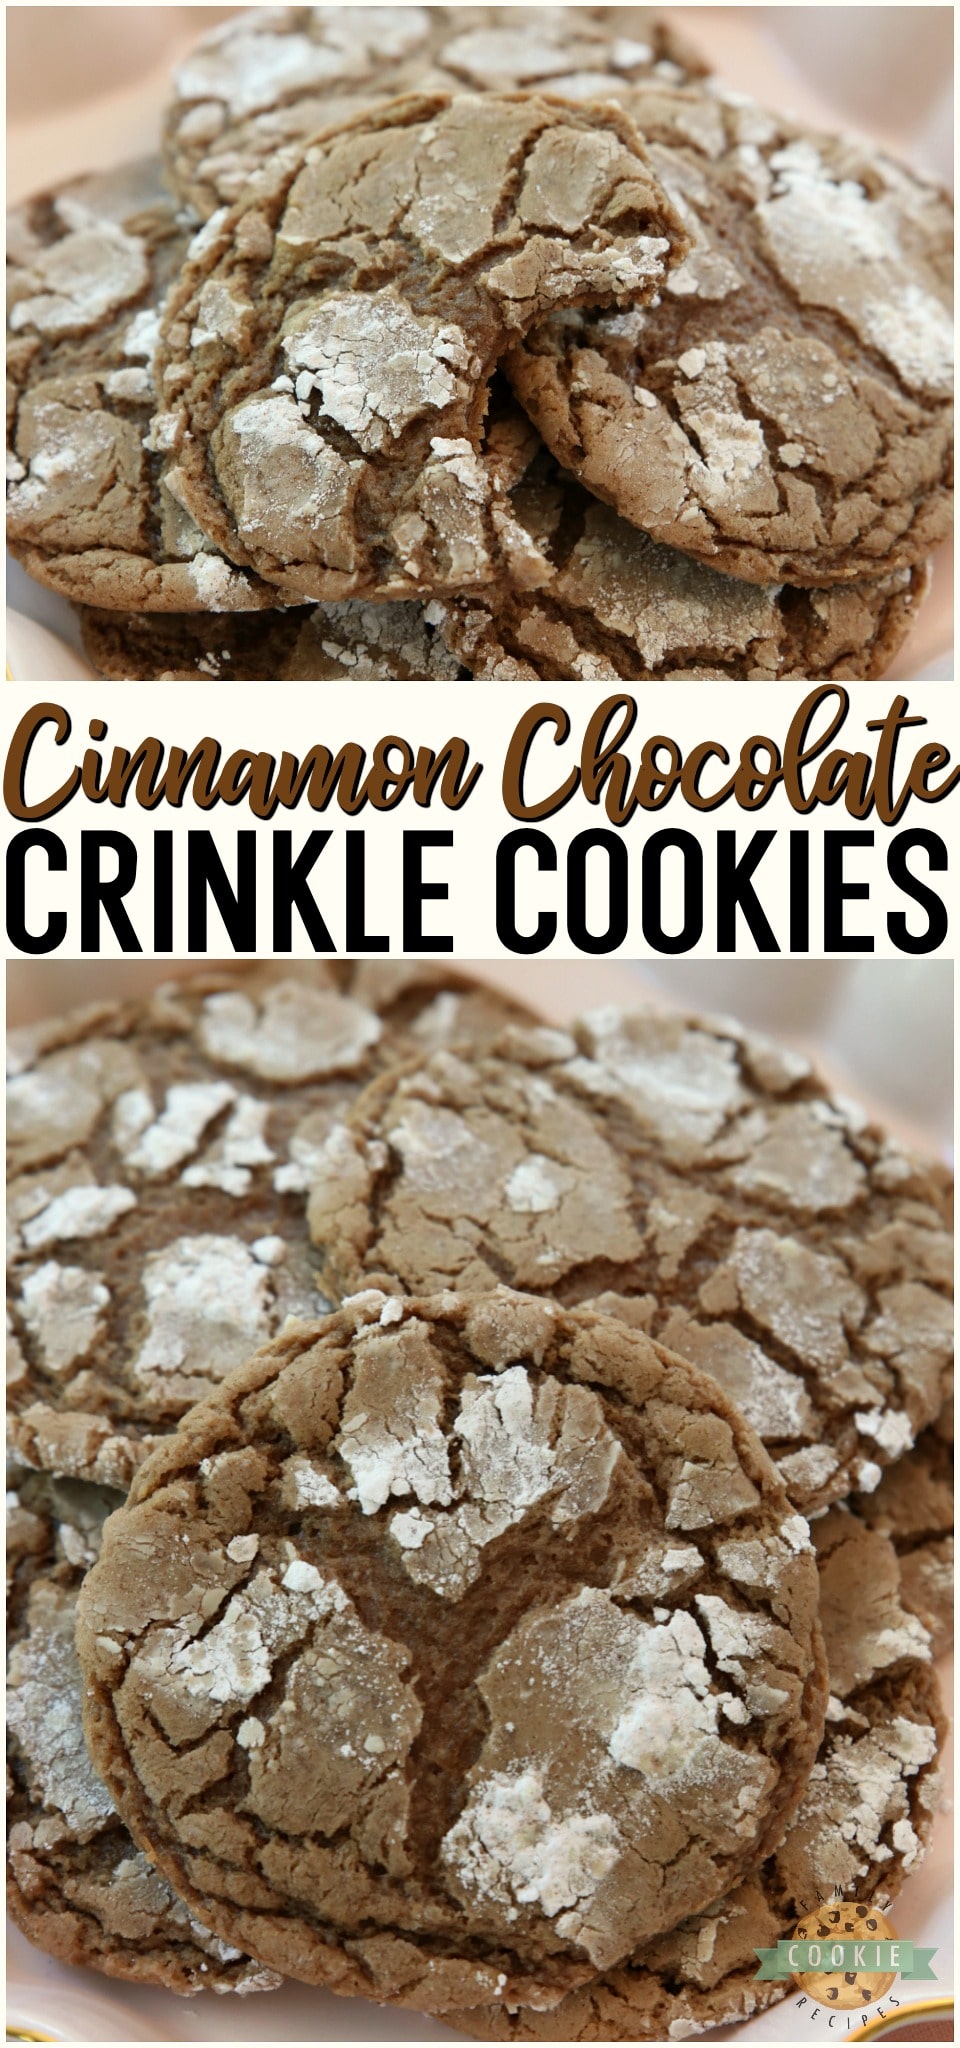 Cinnamon Chocolate Crinkle Cookies taste like Mexican hot chocolate and are amazing! Soft & chewy cookies with a fantastic chocolate taste with a hint of cinnamon.